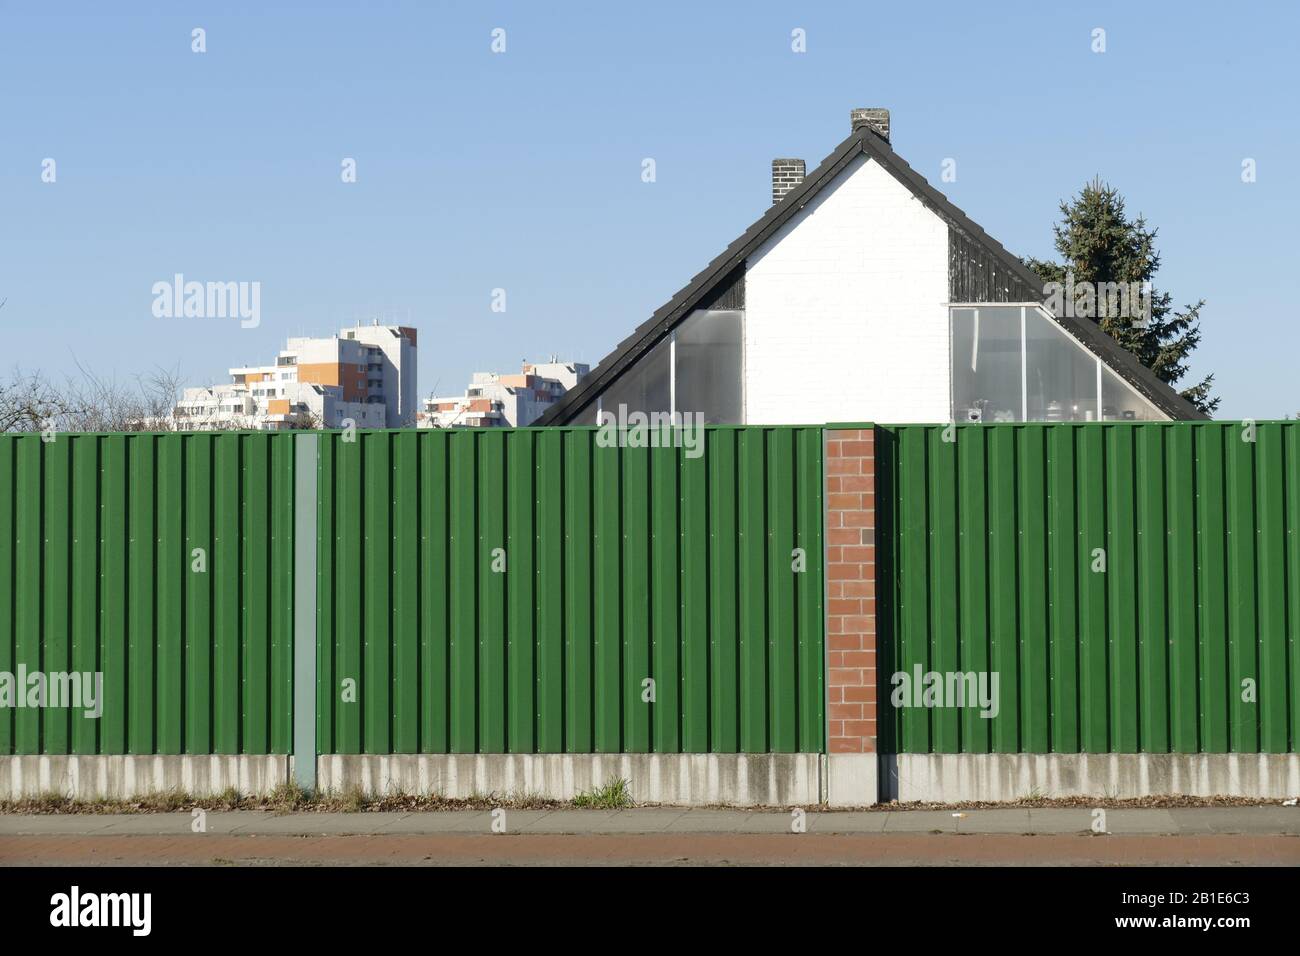 Noise barrier on a street with residential buildings, Bremen, Germany Stock Photo